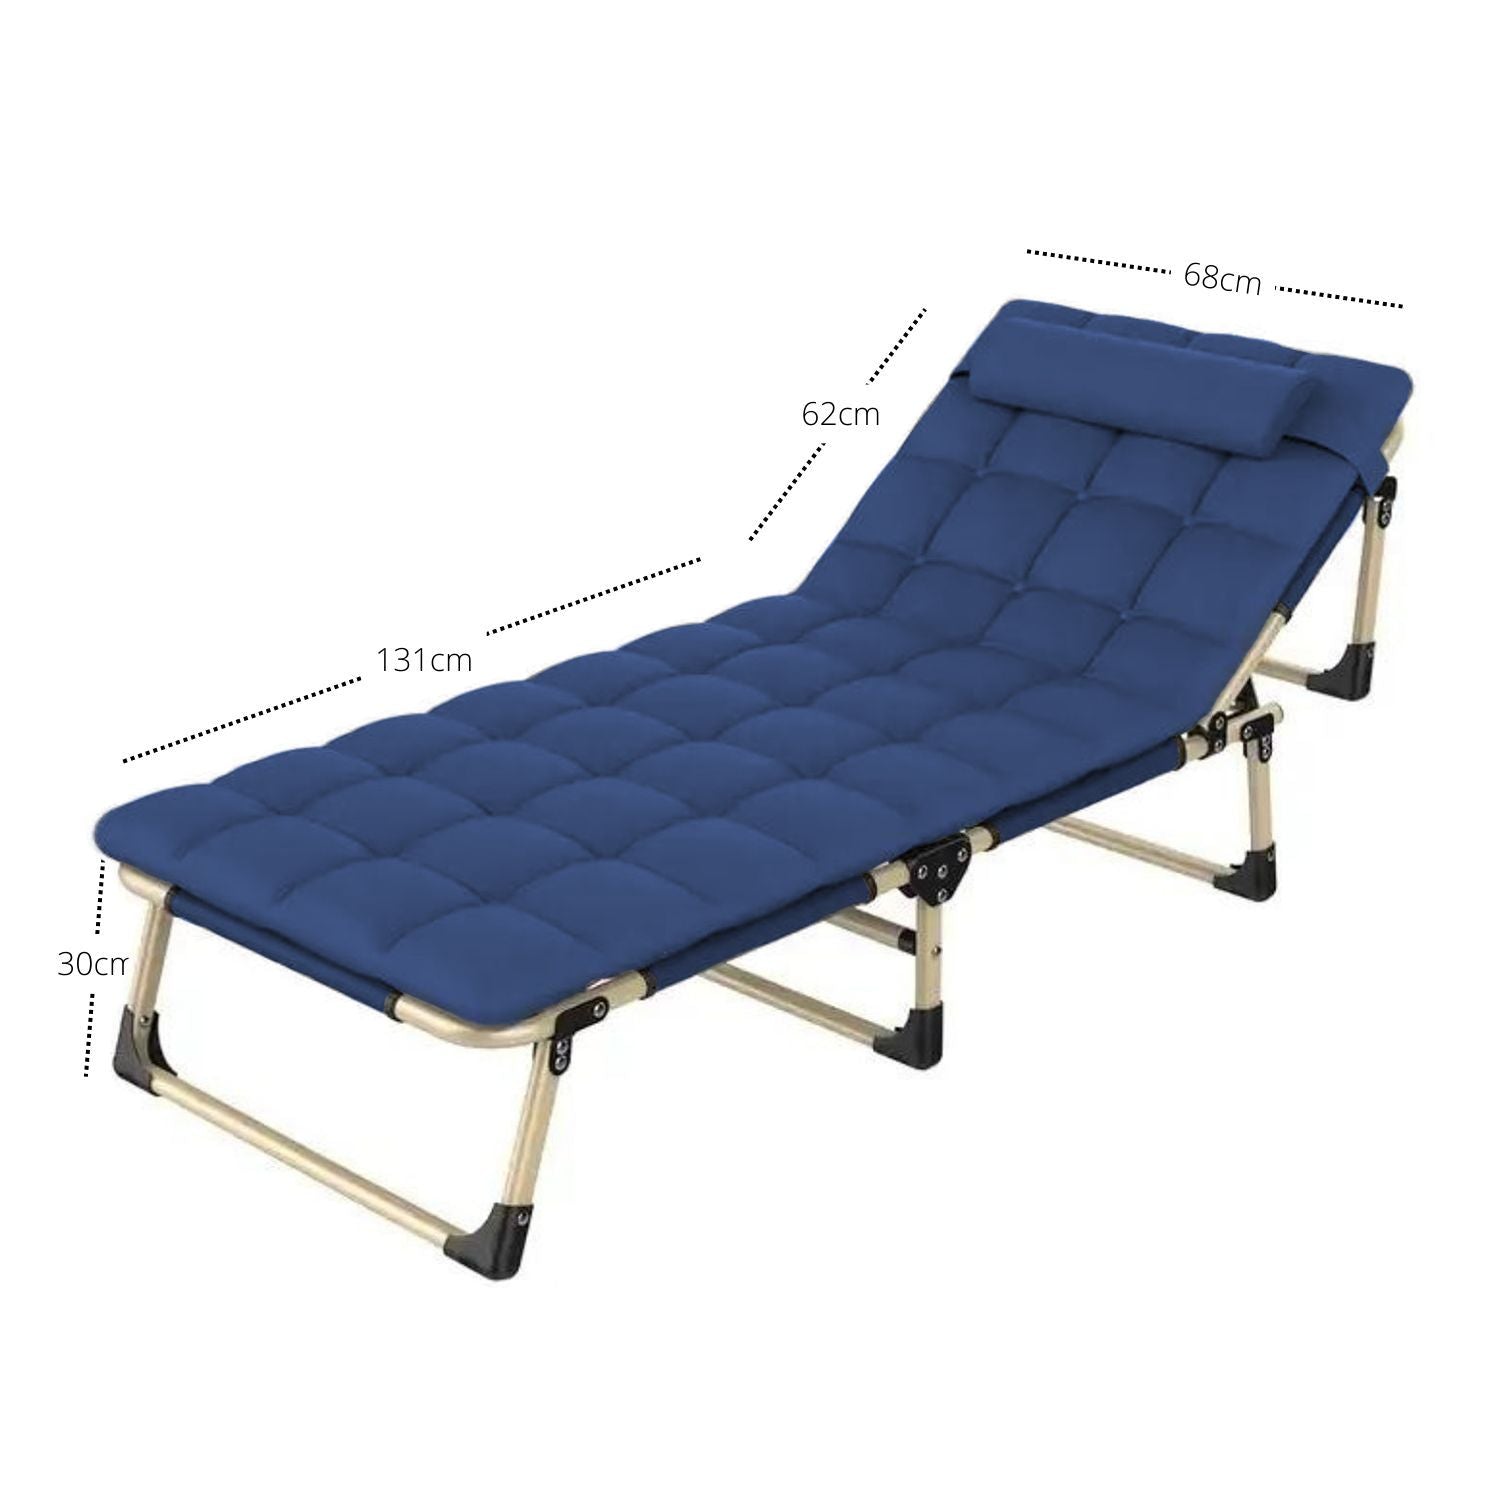 KILIROO Adjustable Portable Folding Bed with Mattress and Headrest (Blue)